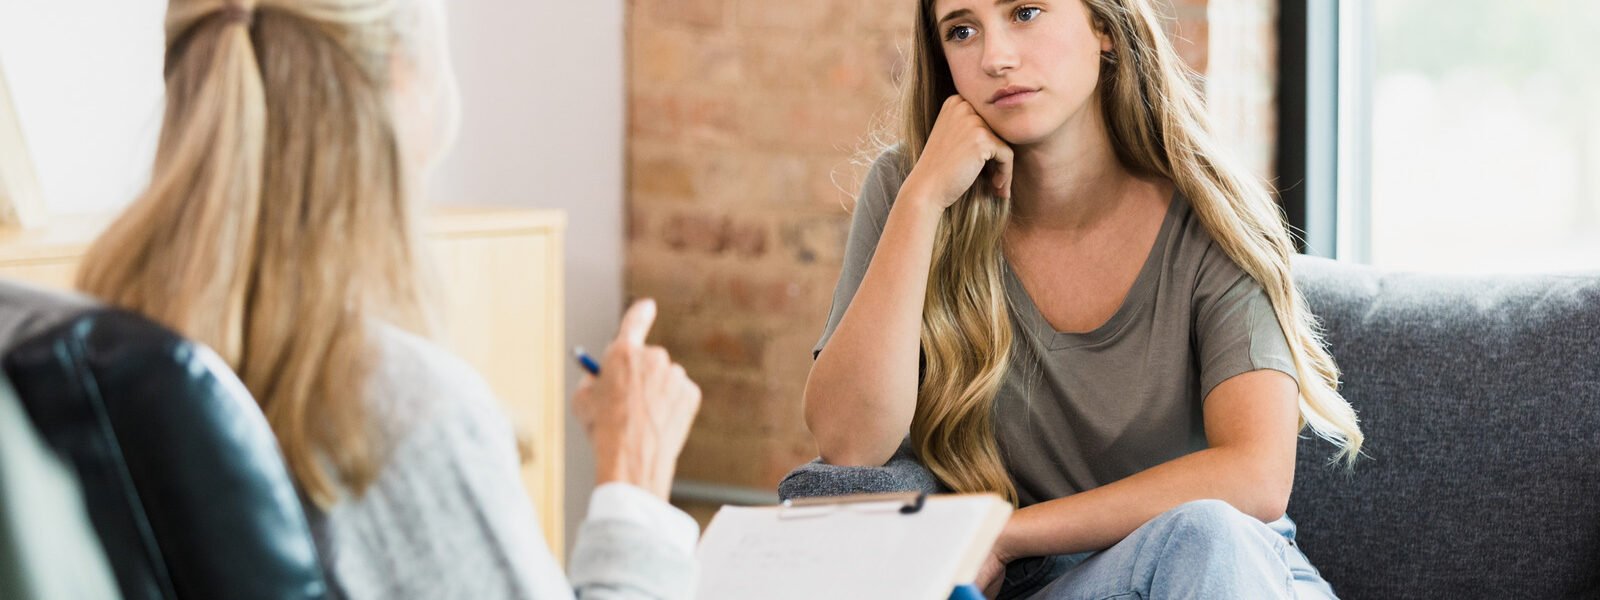 Expert Advice On How To Break Up With Your Therapist - Health Digest